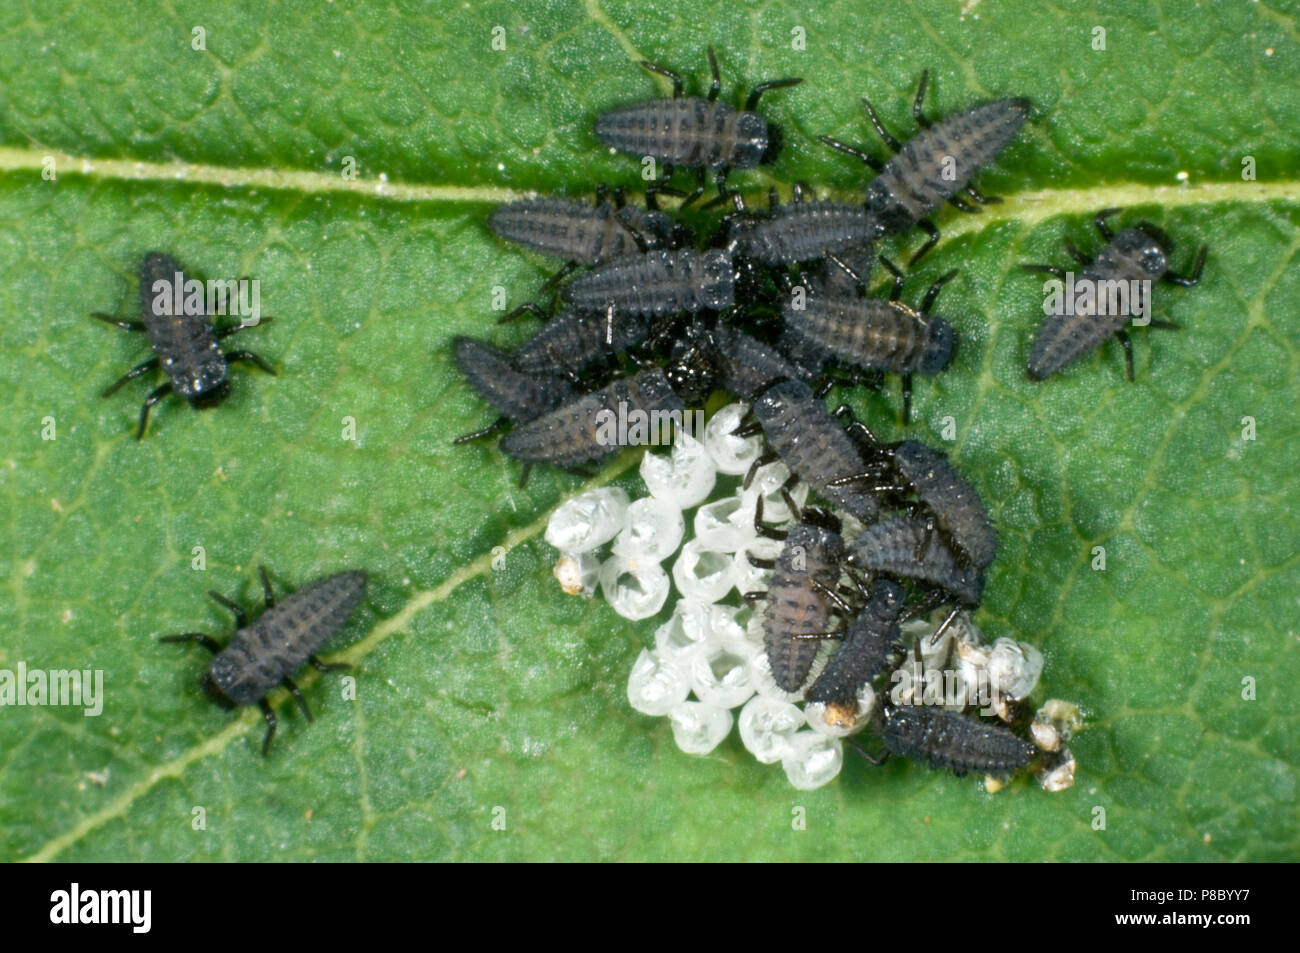 Newly hatched harlequin ladybird, Harmonia axyridis, larvae still with a raft of empty egg cases, June Stock Photo